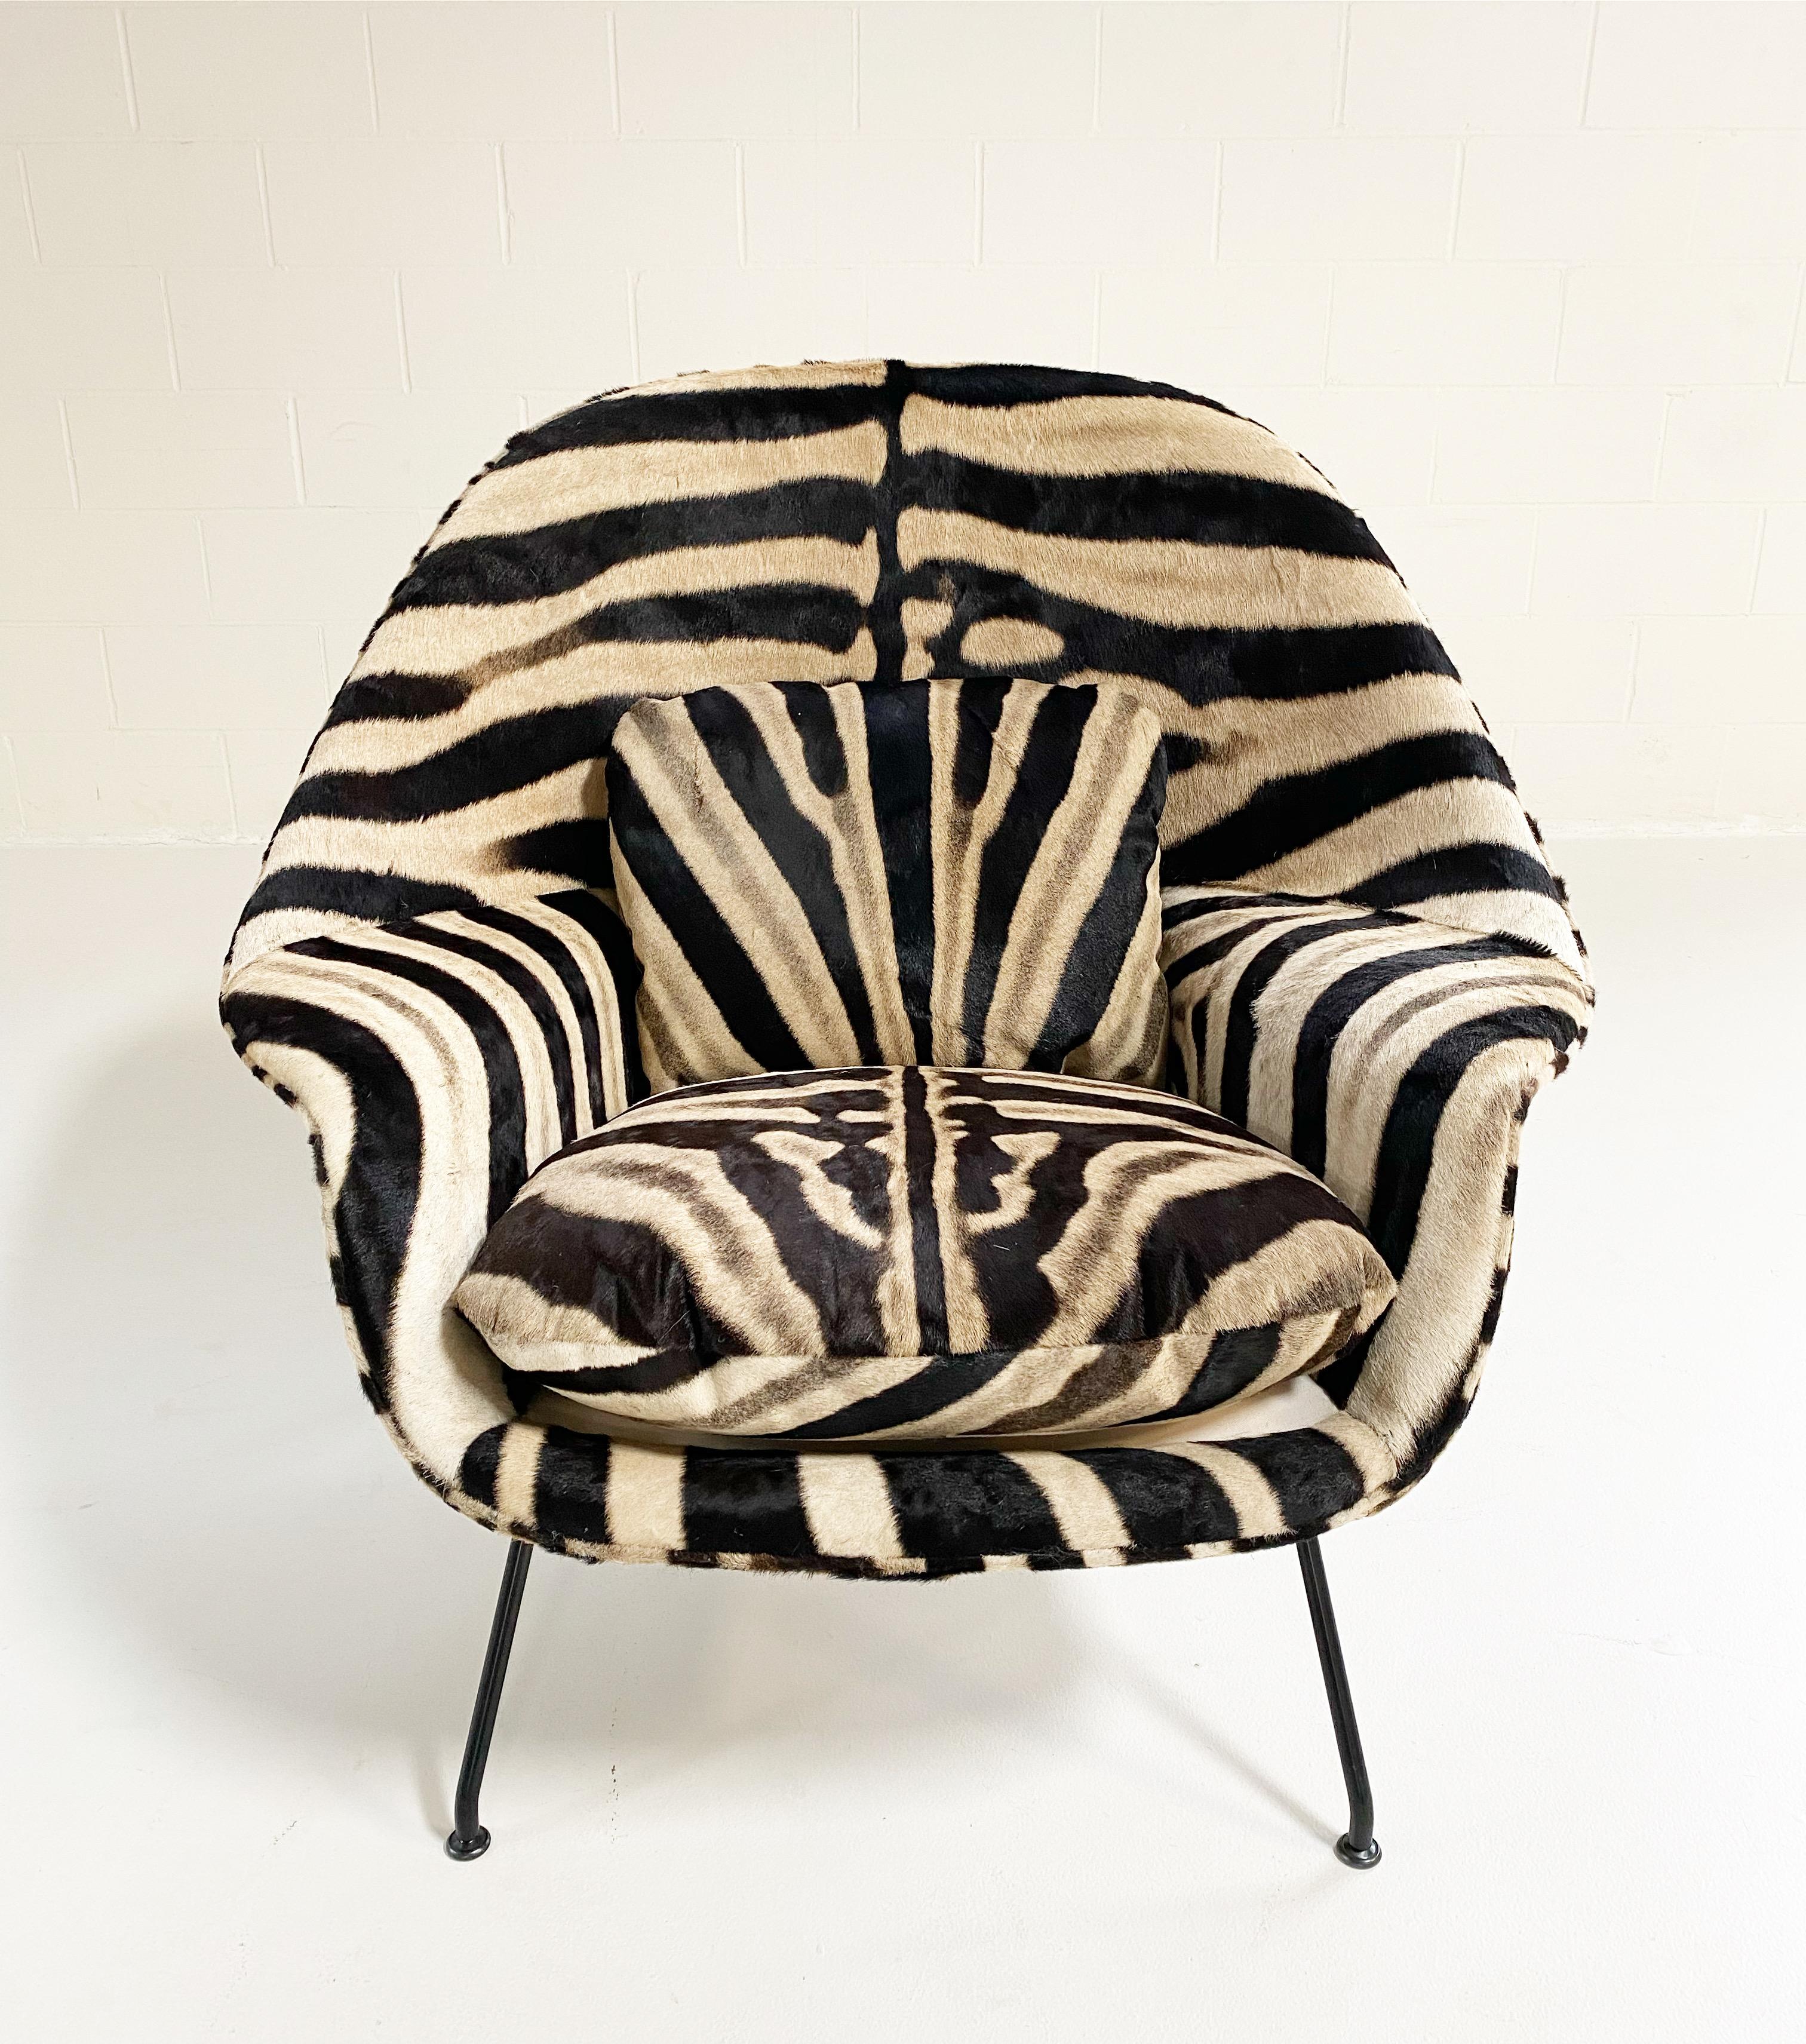 Contemporary Forsyth Bespoke Eero Saarinen Womb Chair and Ottoman in Zebra For Sale